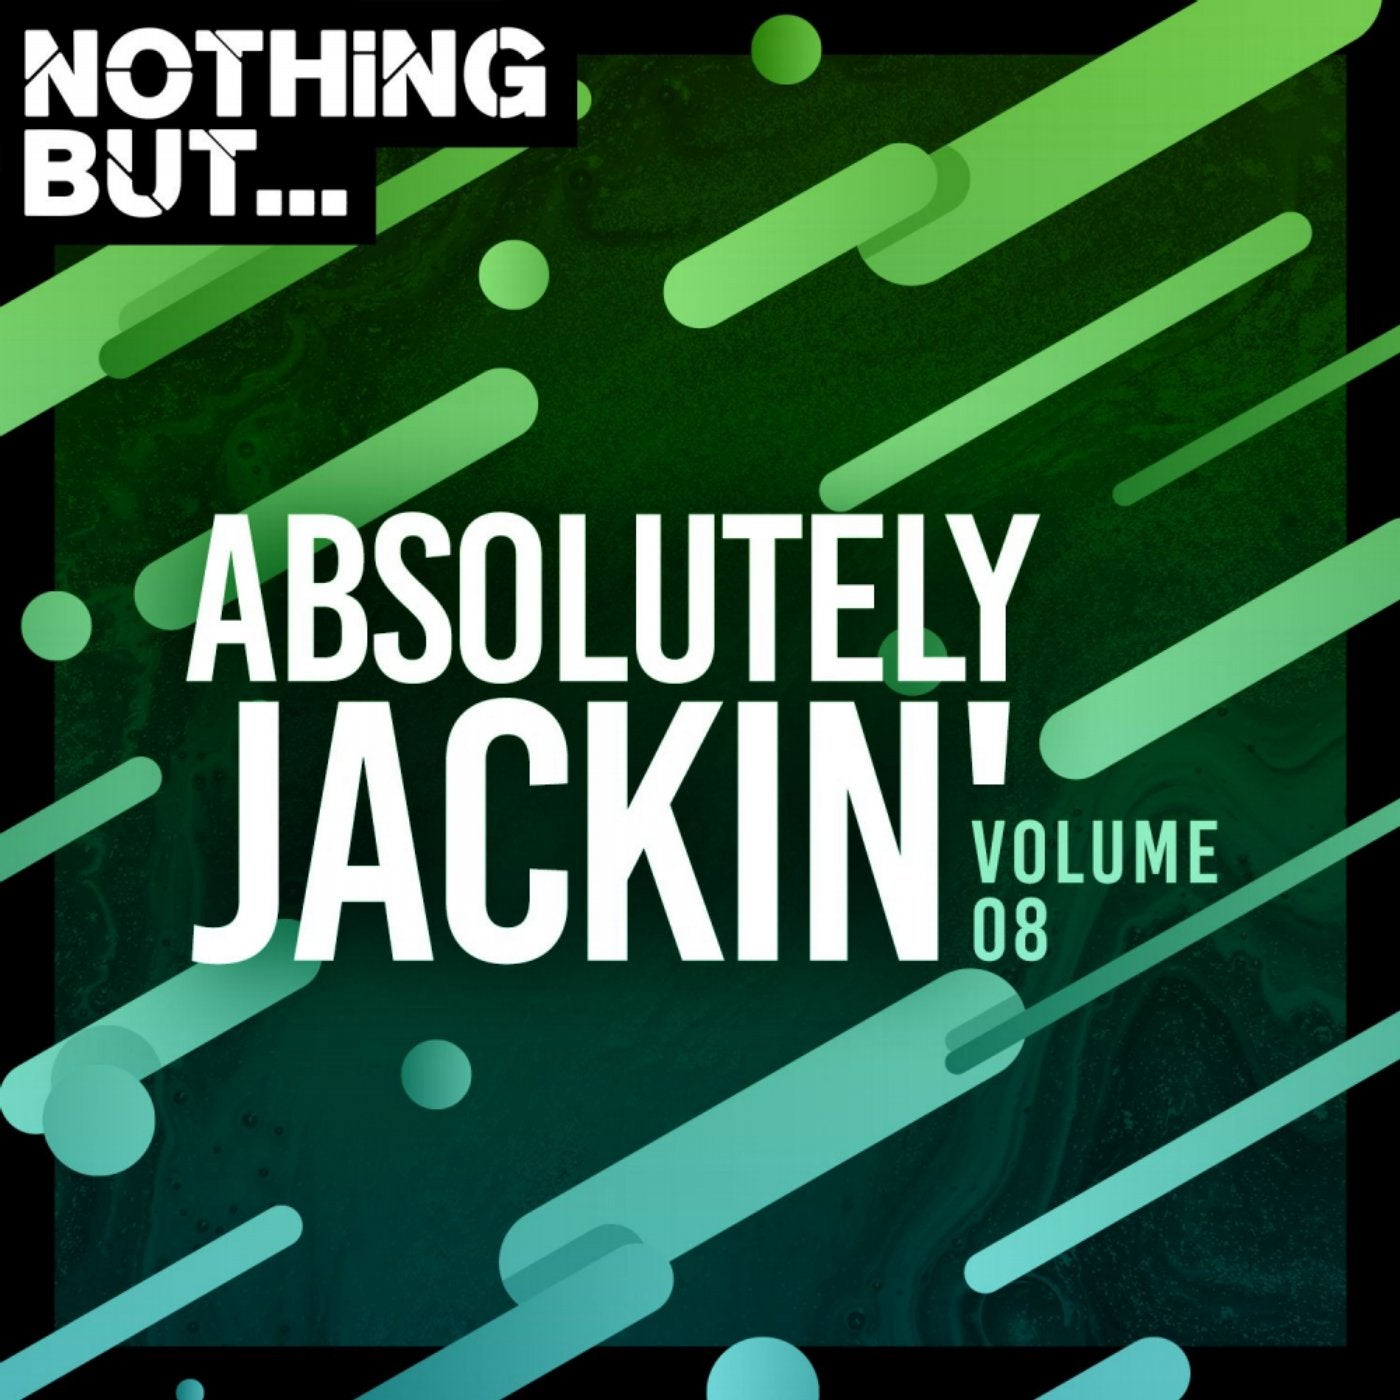 Nothing But... Absolutely Jackin', Vol. 08